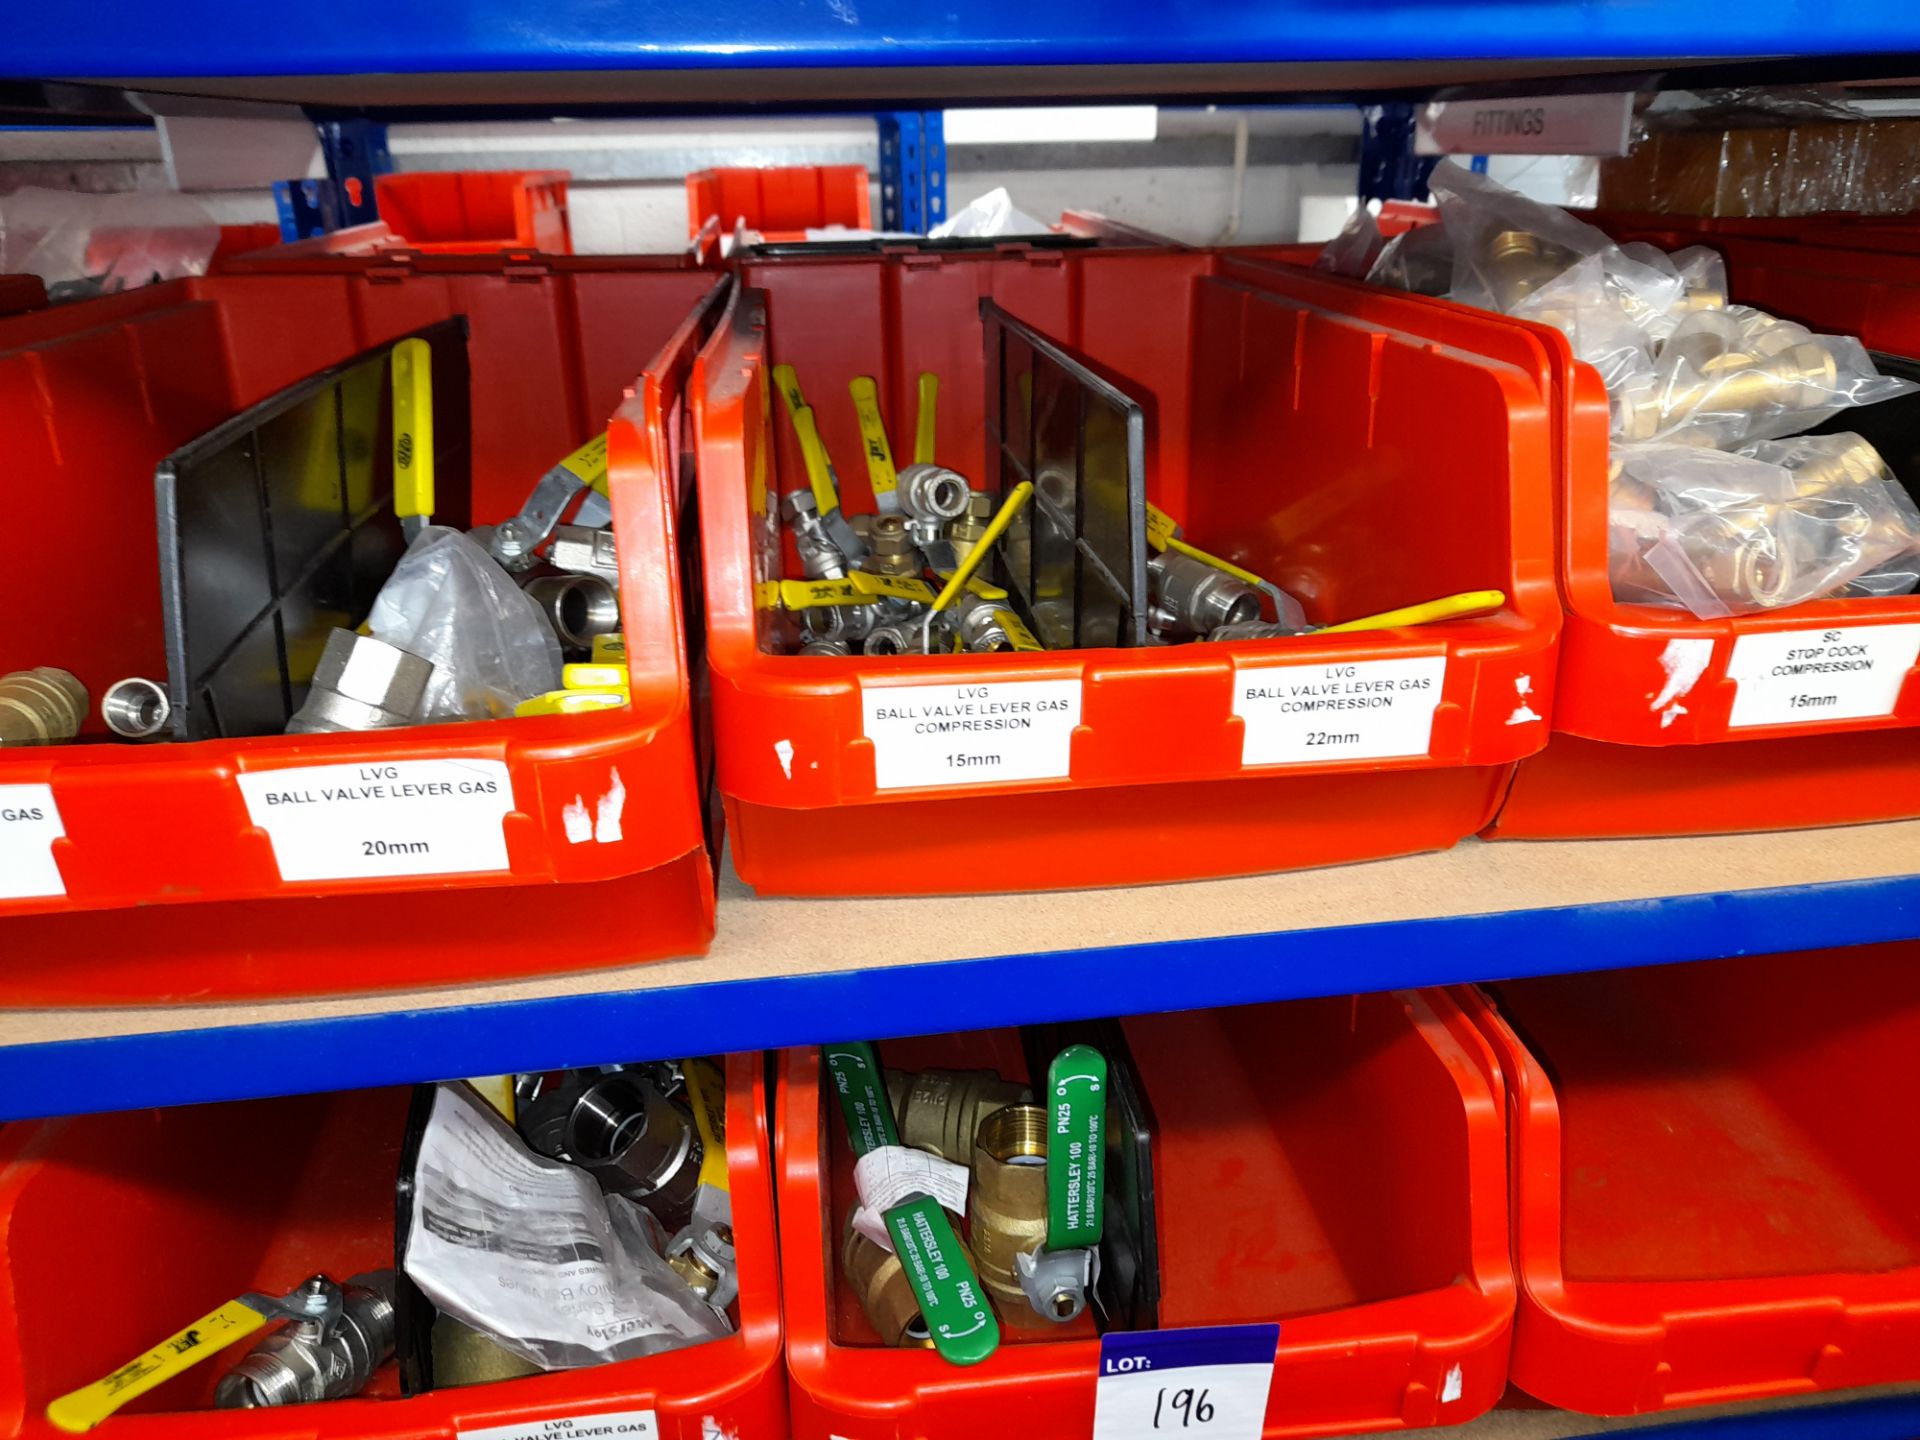 Large Quantity of stock to 2 bays including ball valve levers, (various sizes), stop cock taps (